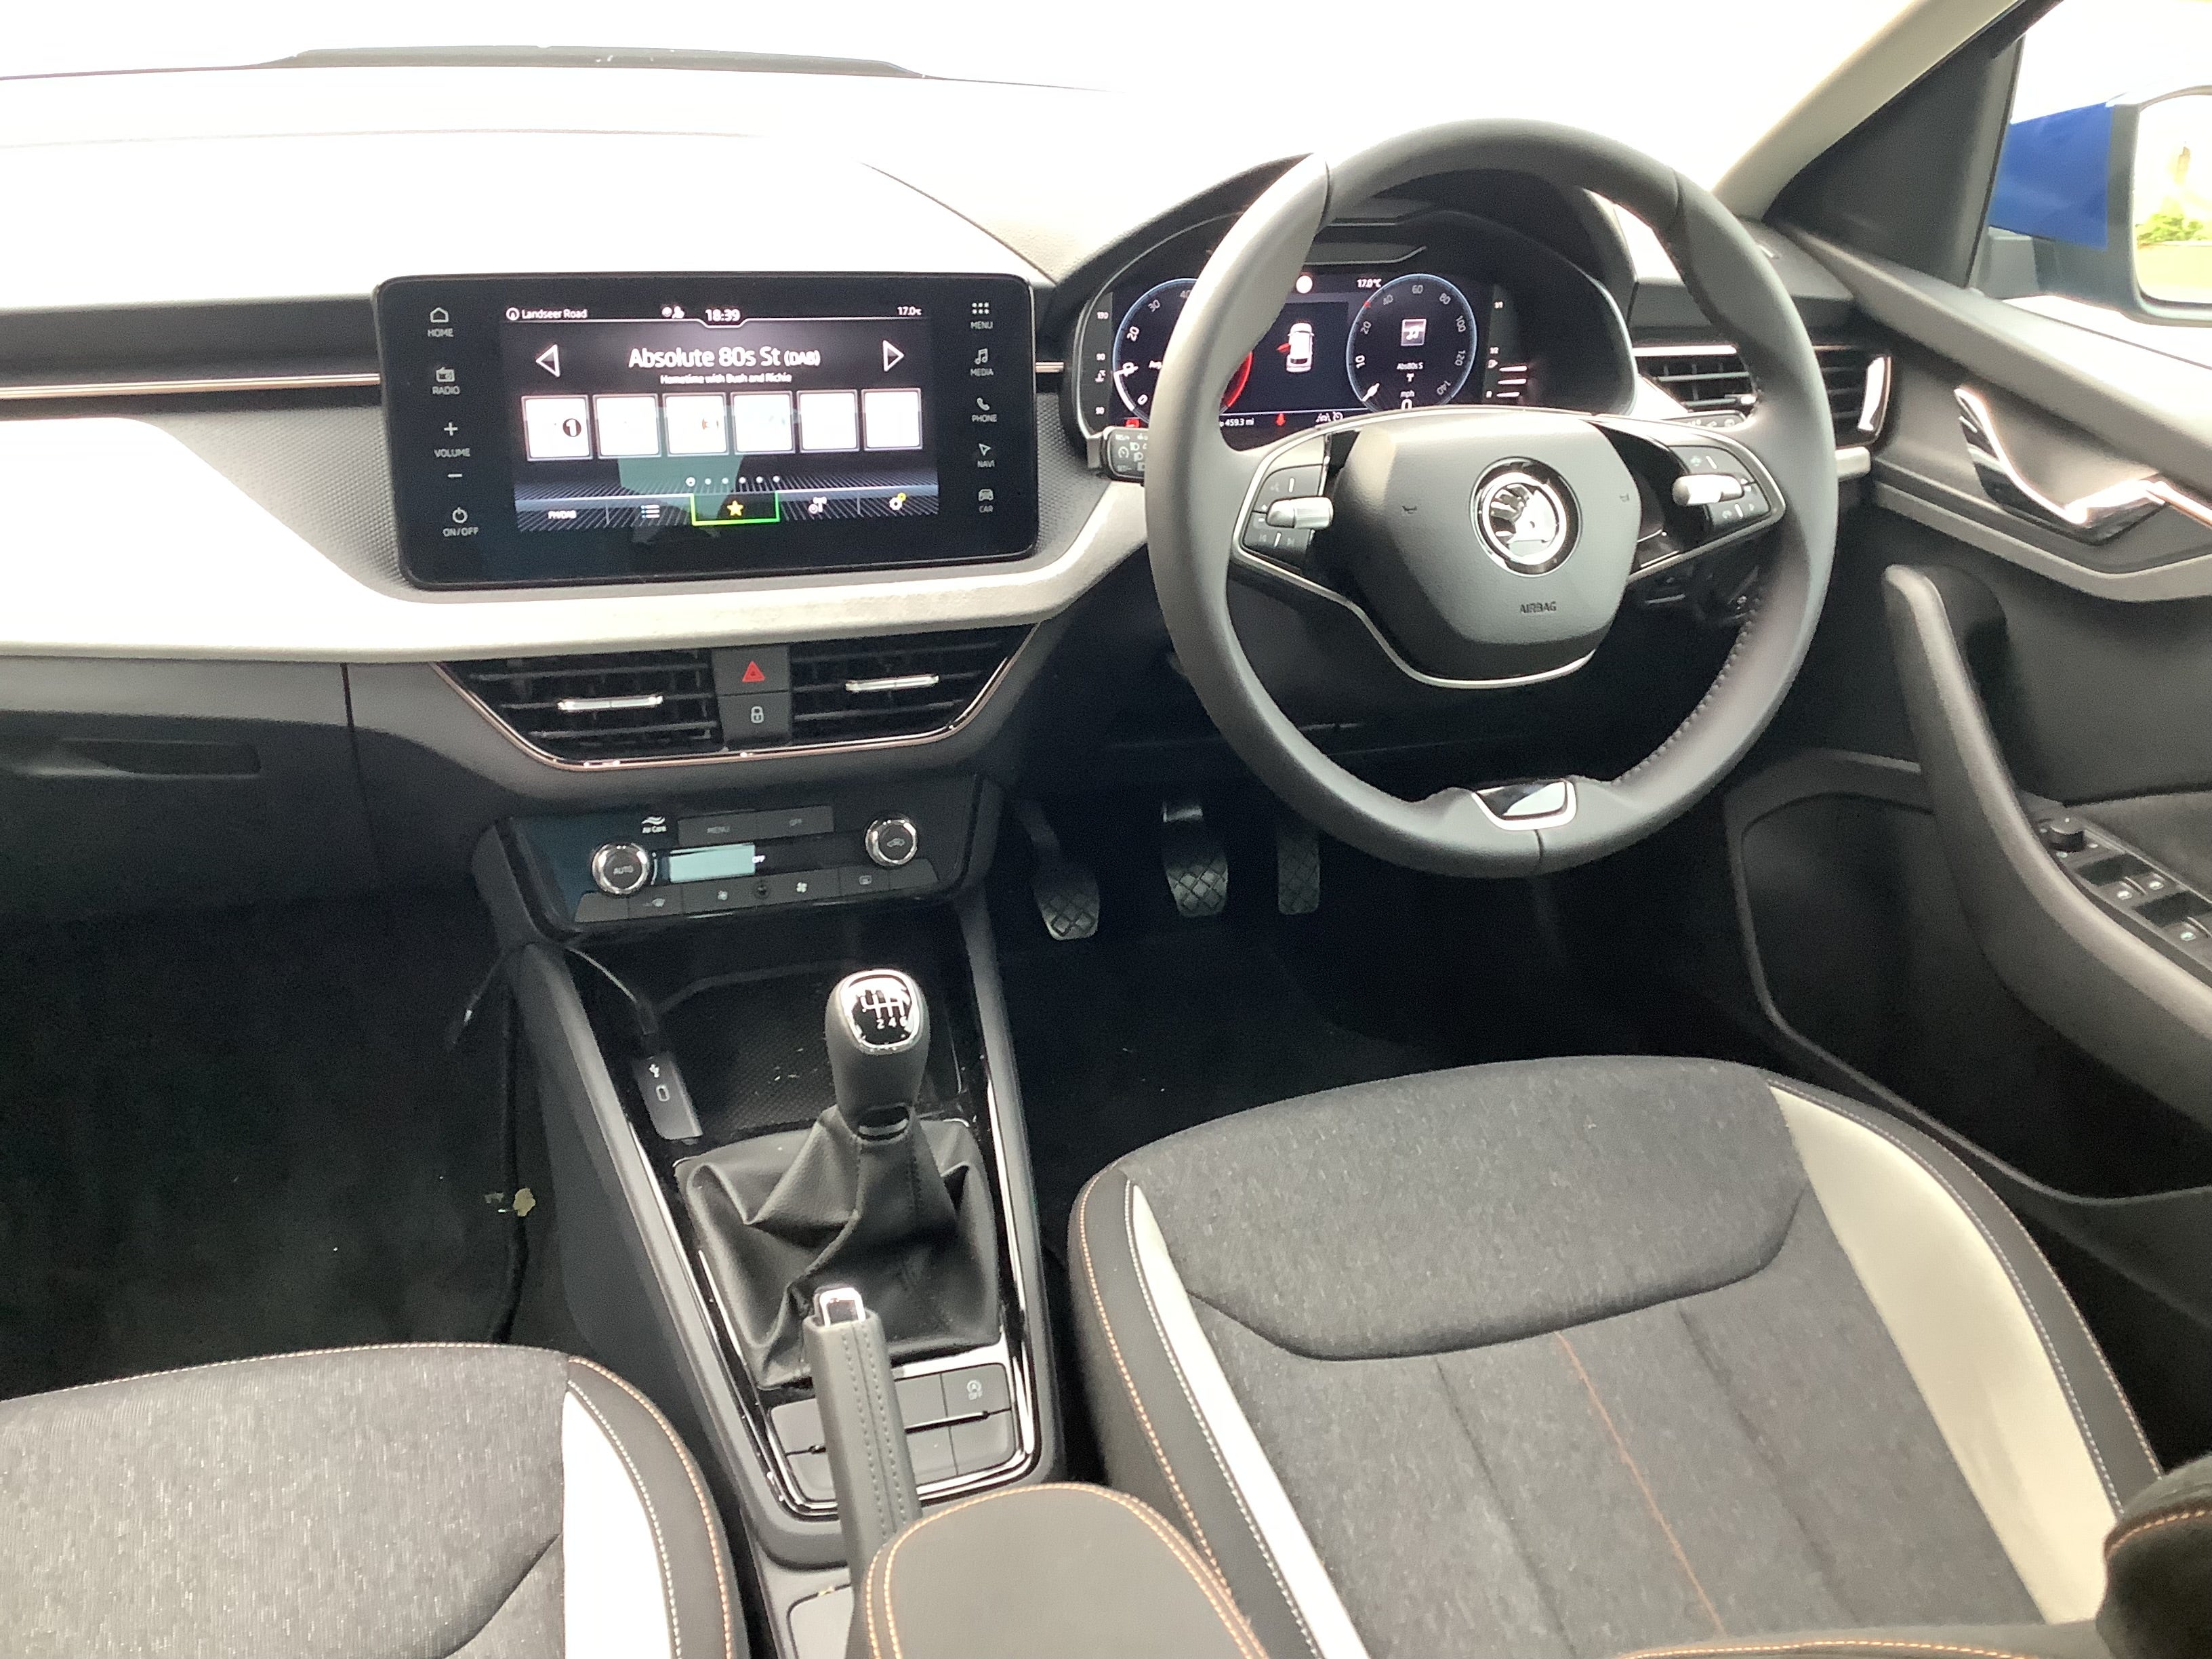 The two-spoke multifunction steering wheel and 8.25-inch touchscreen